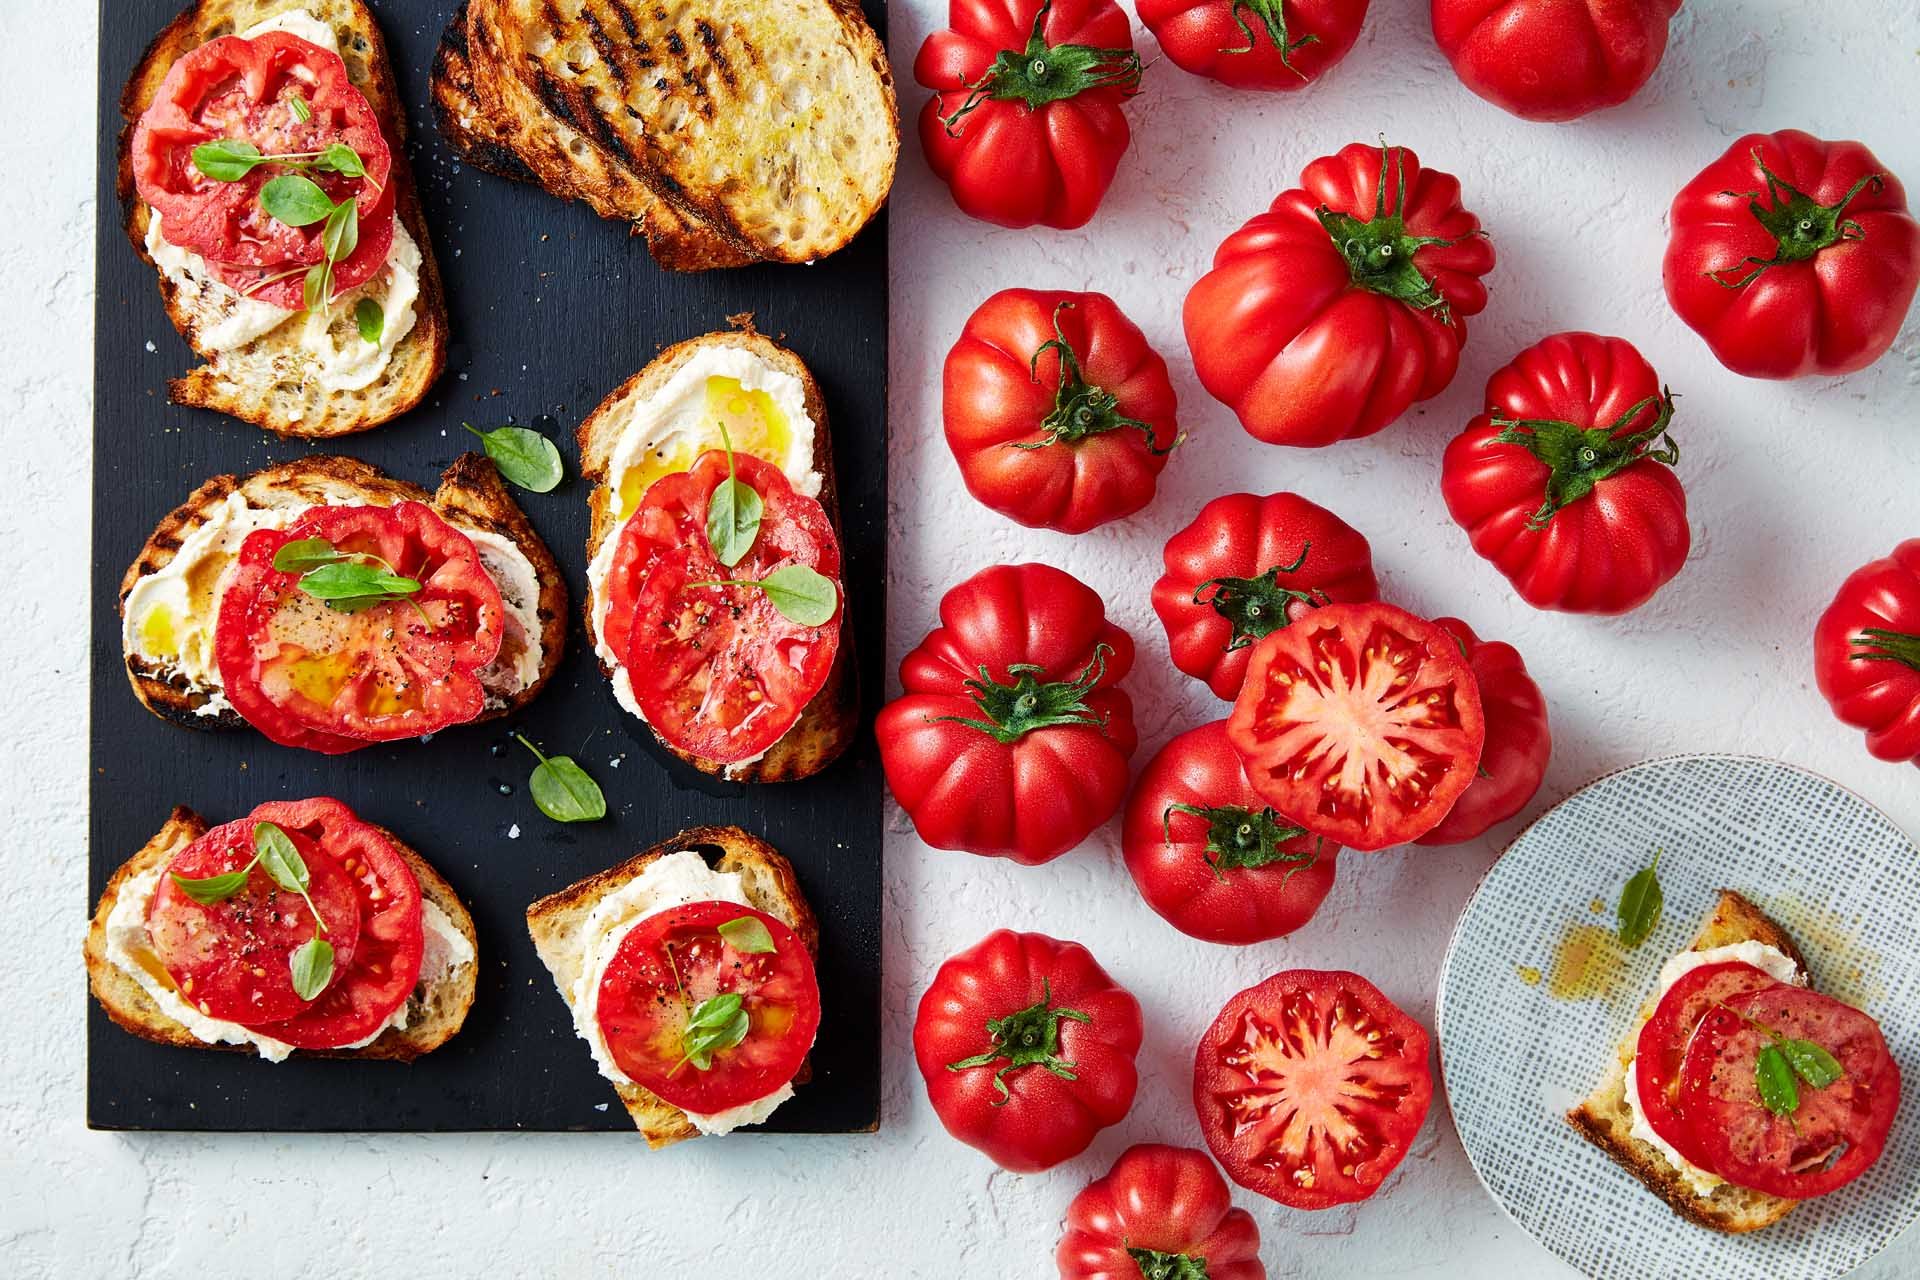 Toasted bread with cream cheese, and sliced monterosa tomates on top with basil.